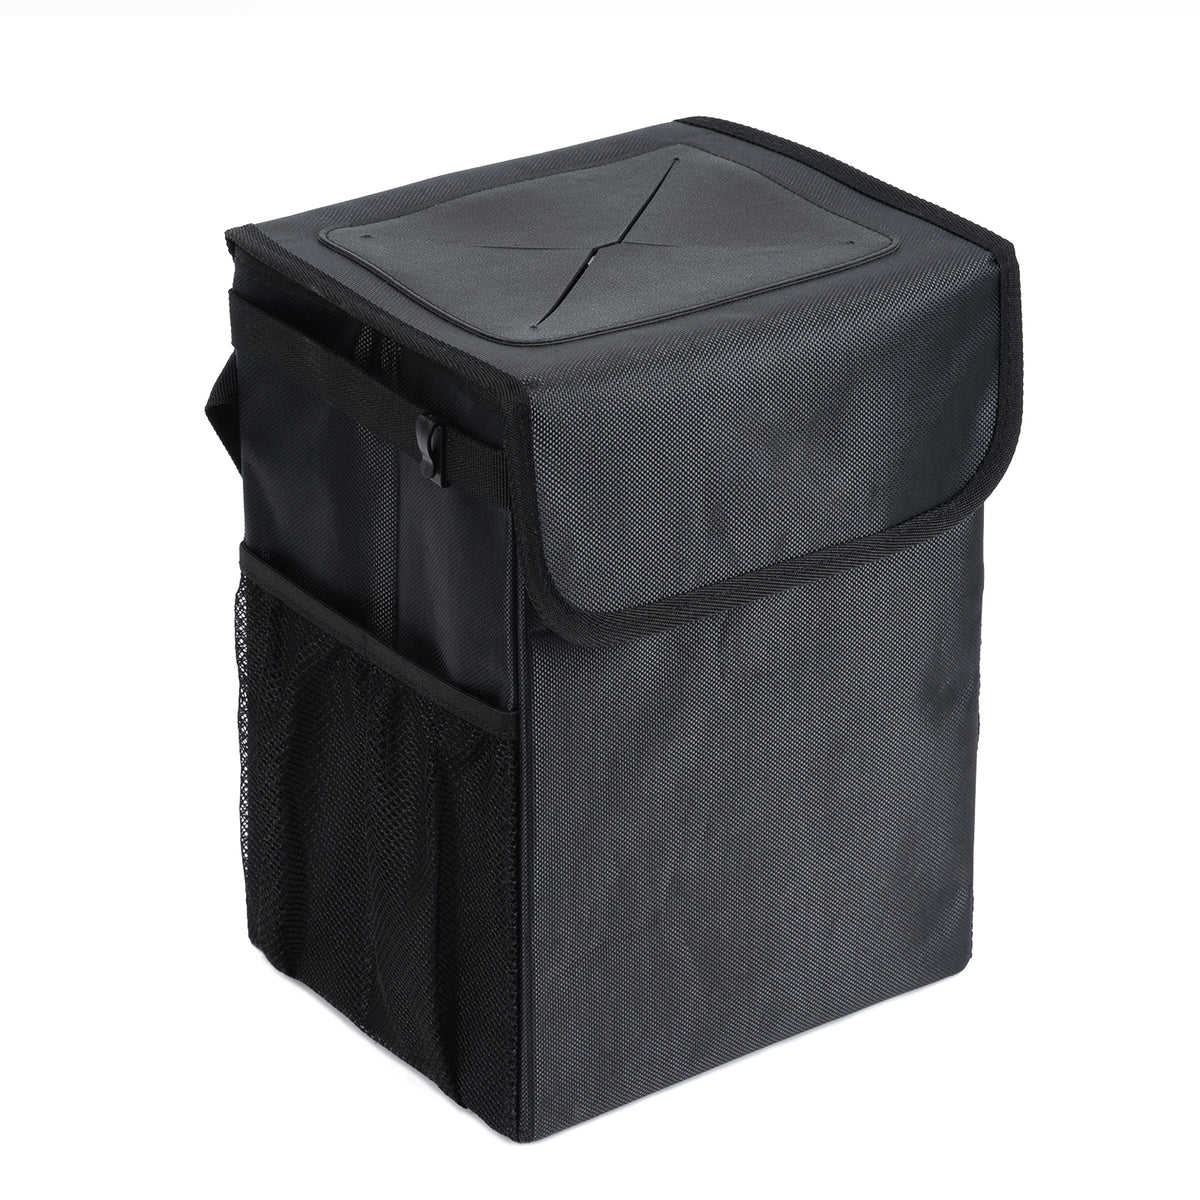 Car Trash Can with Lid and Storage Pockets, Eco-friendly, Reusable, 100% Leak-Proof Auto Organizer, Waterproof Garbage Can, Multipurpose Trash Bin